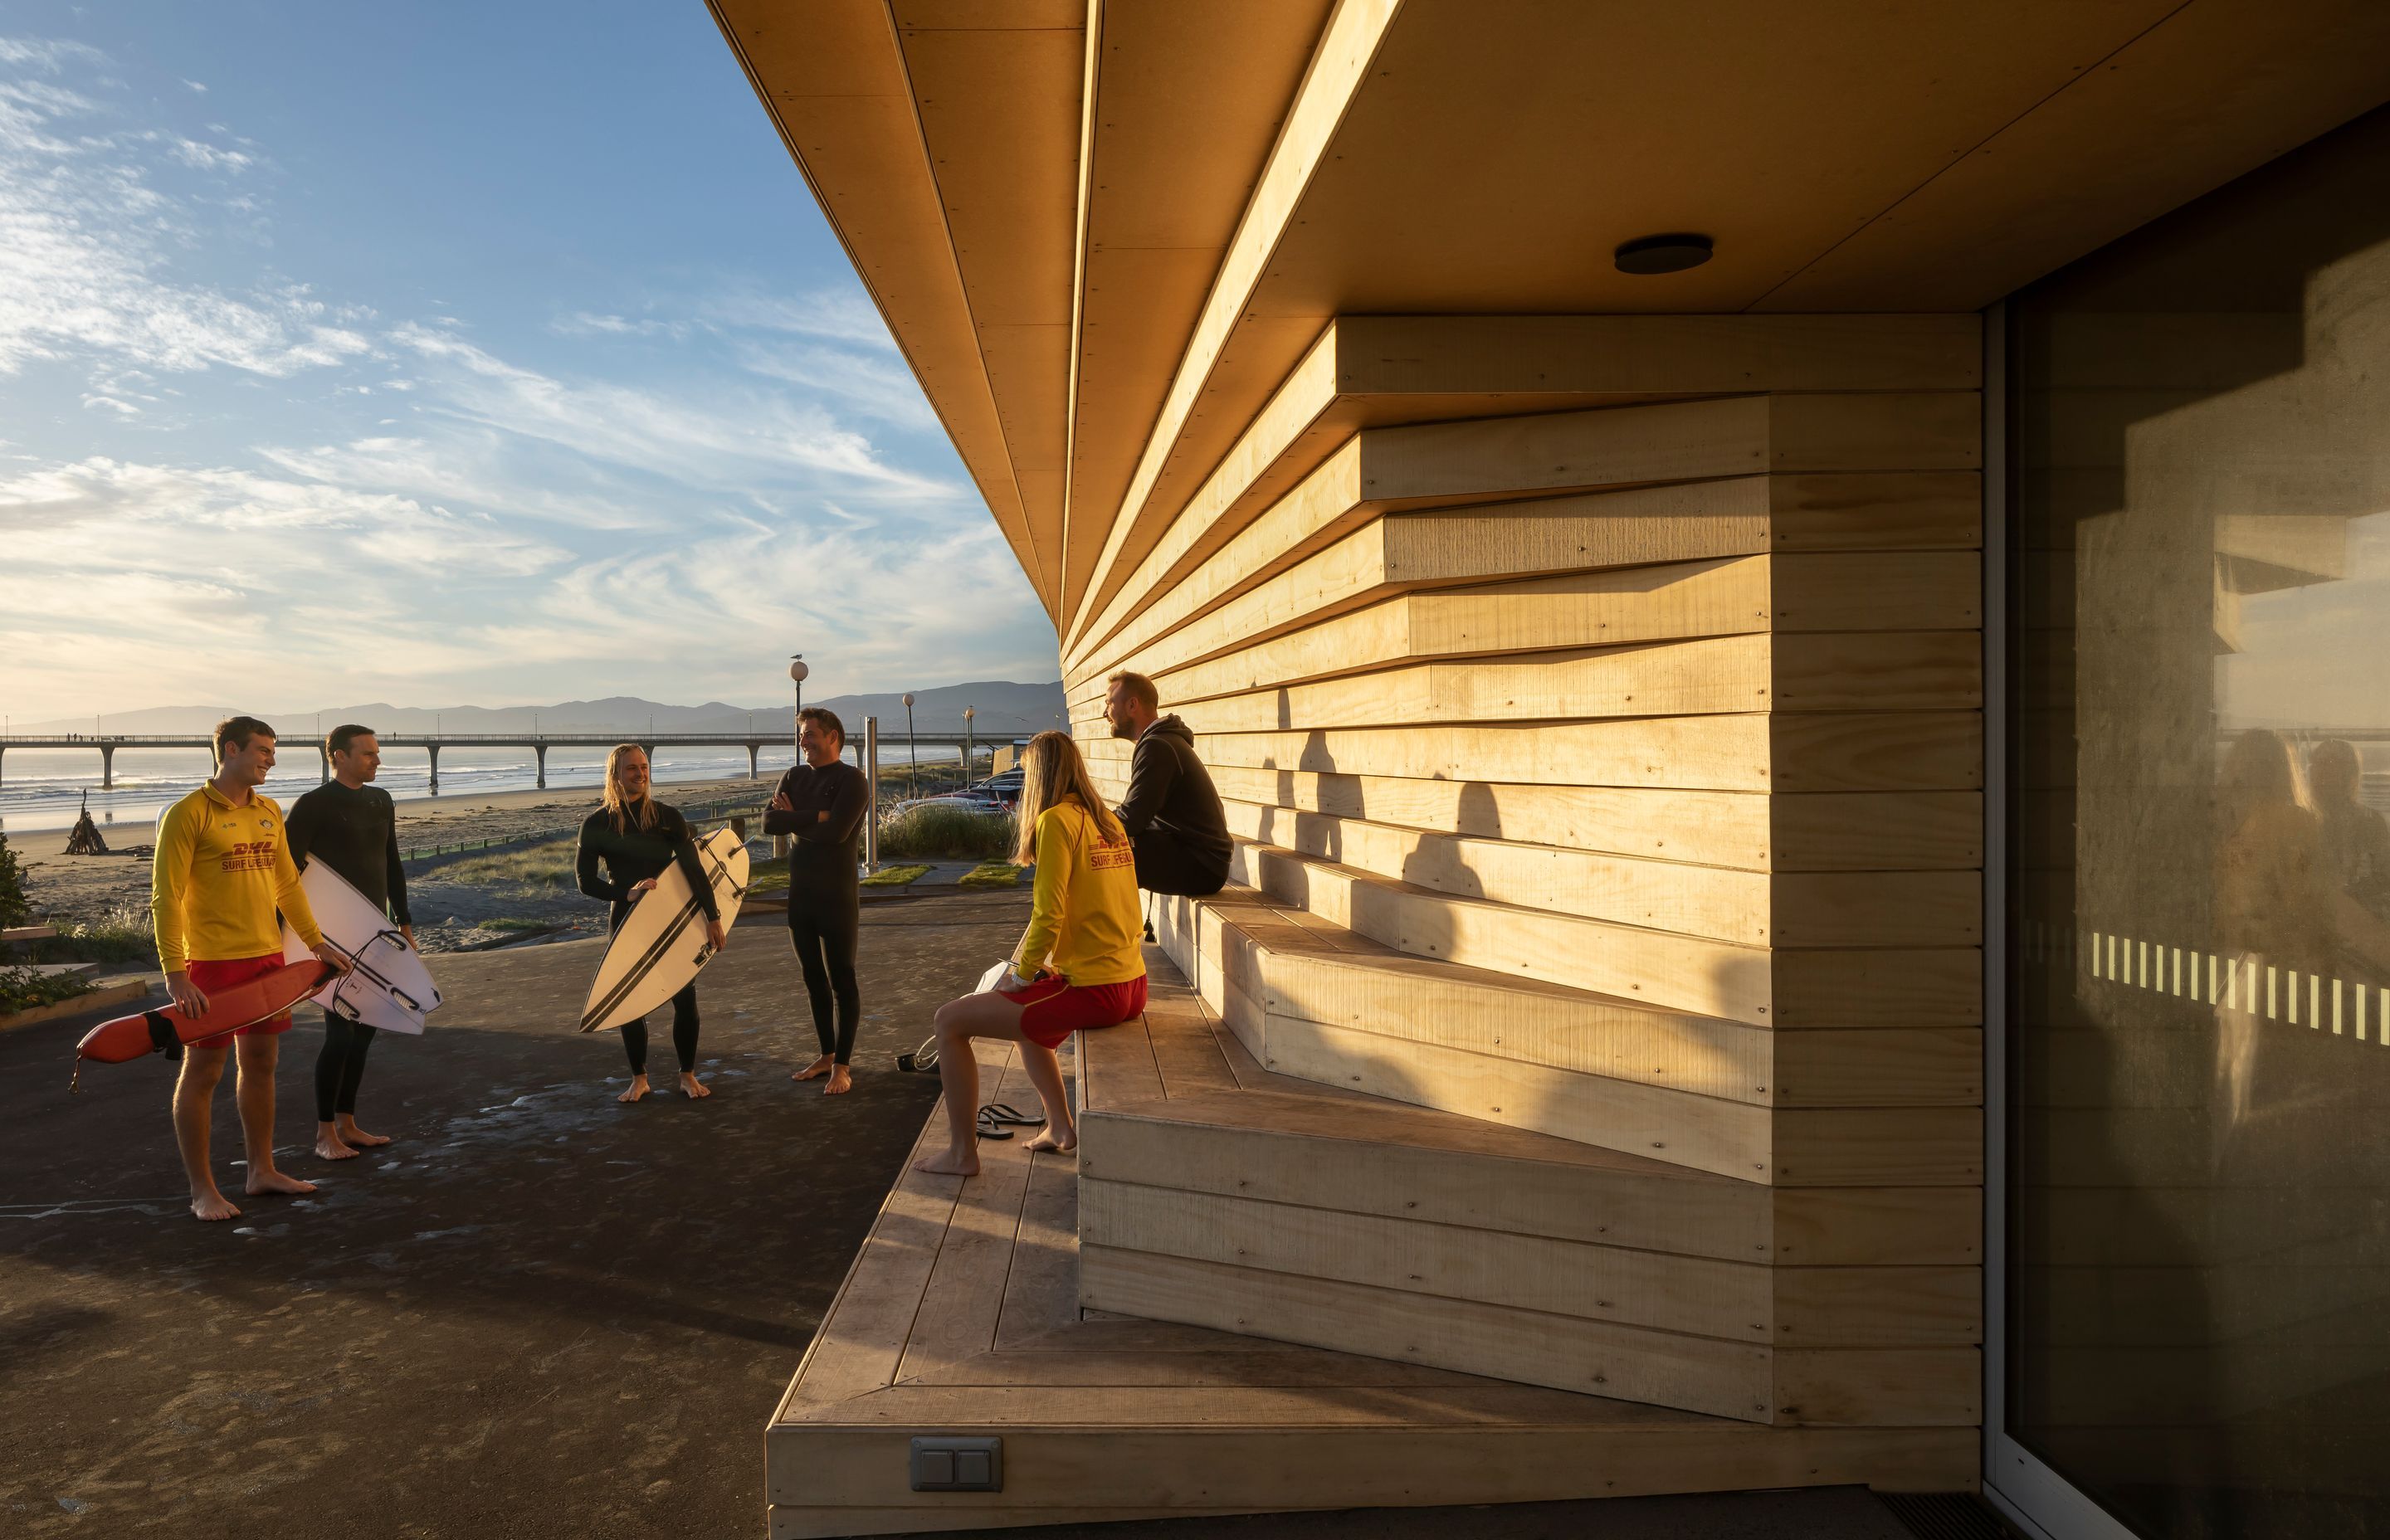 Beyond the Surf Lifesaving Club, the iconic New Brighton pier juts out into the sea.